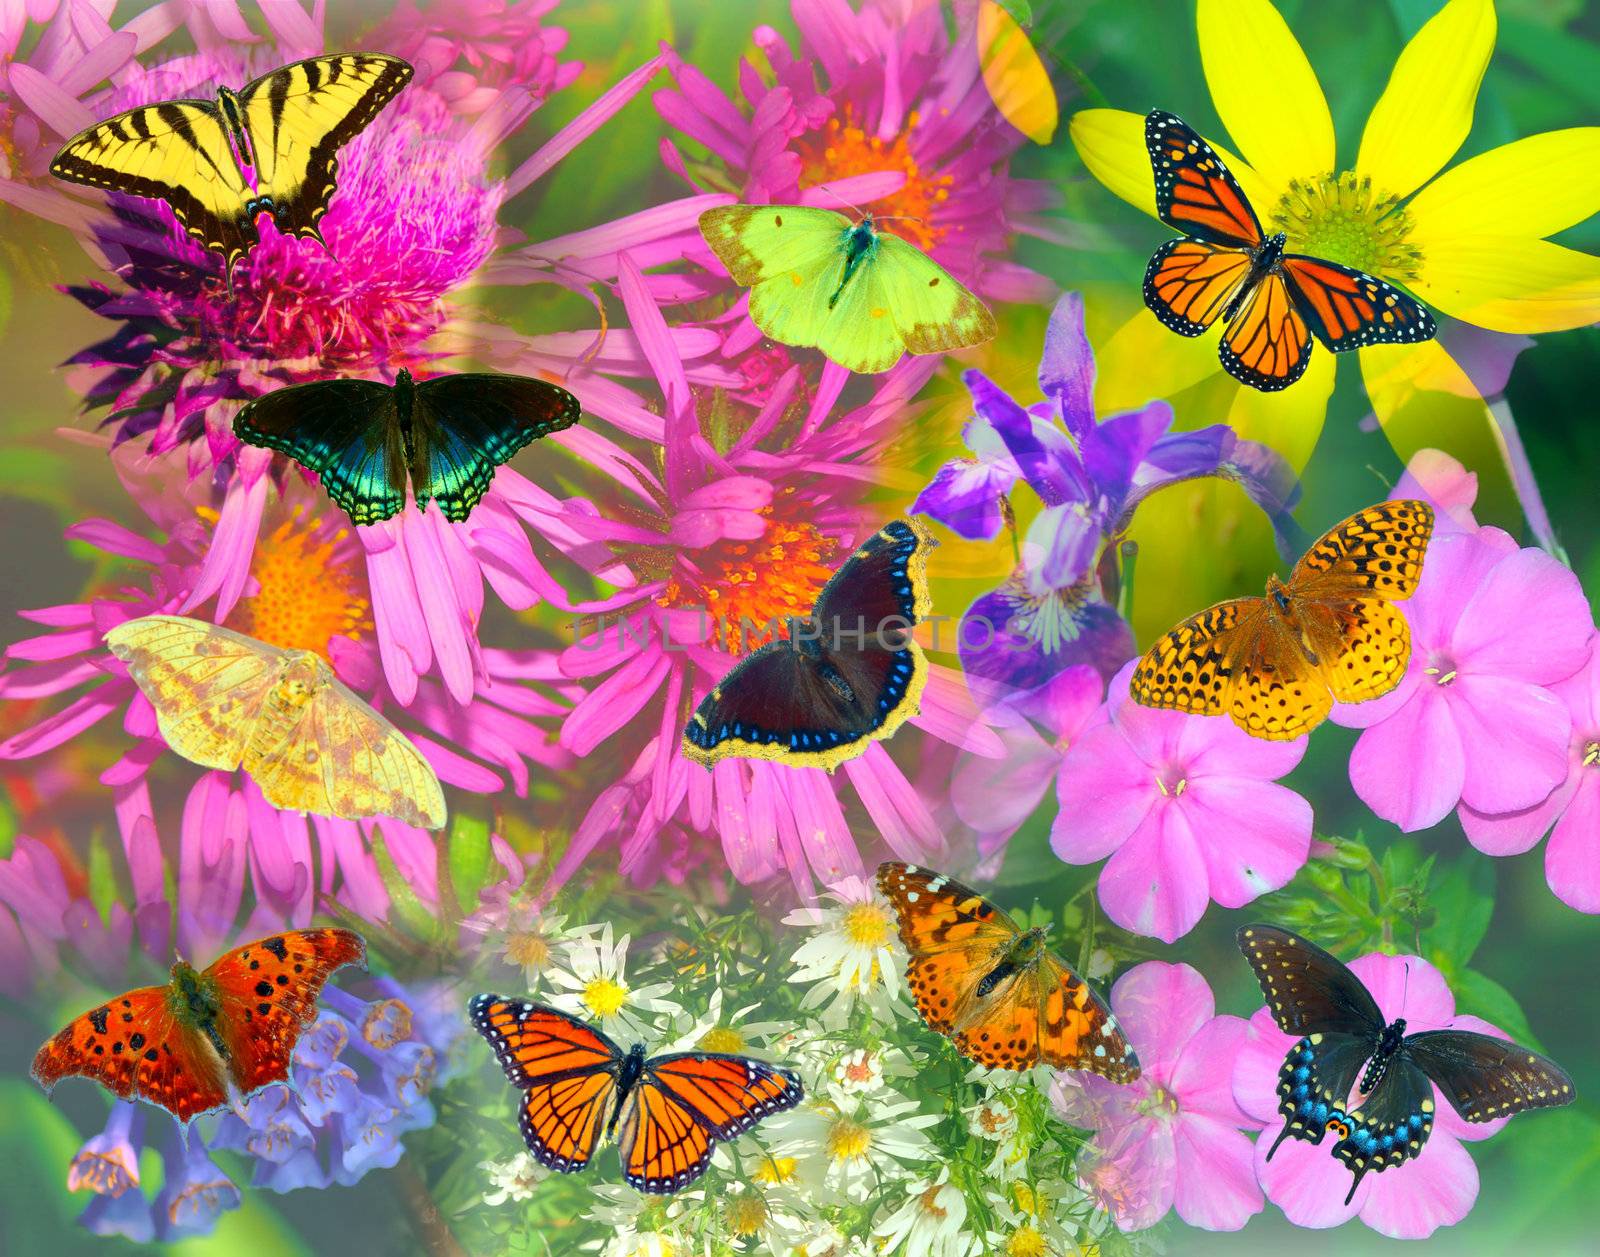 Butterfly and Flower Collage by Wirepec